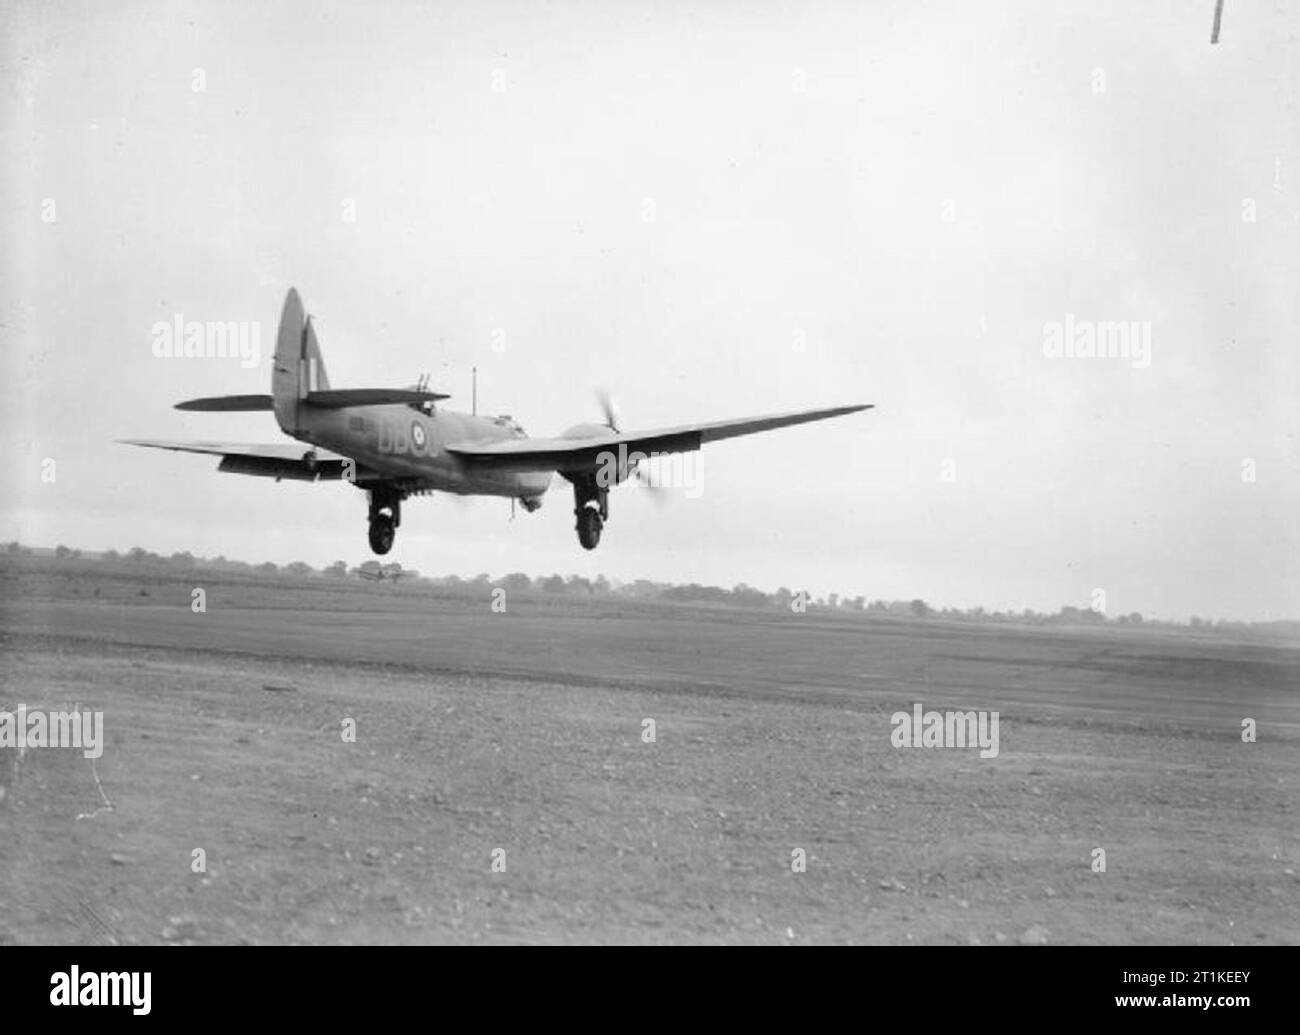 Royal Air Force Bomber Command, 1939-1941. Bristol Blenheim Mark IV, Z5899 'GB-J', of No. 105 Squadron RAF based at Watton, Norfolk, about to touch down on the main runway at Attlebridge, Norfolk, during an Army Co-operation exercise. Stock Photo